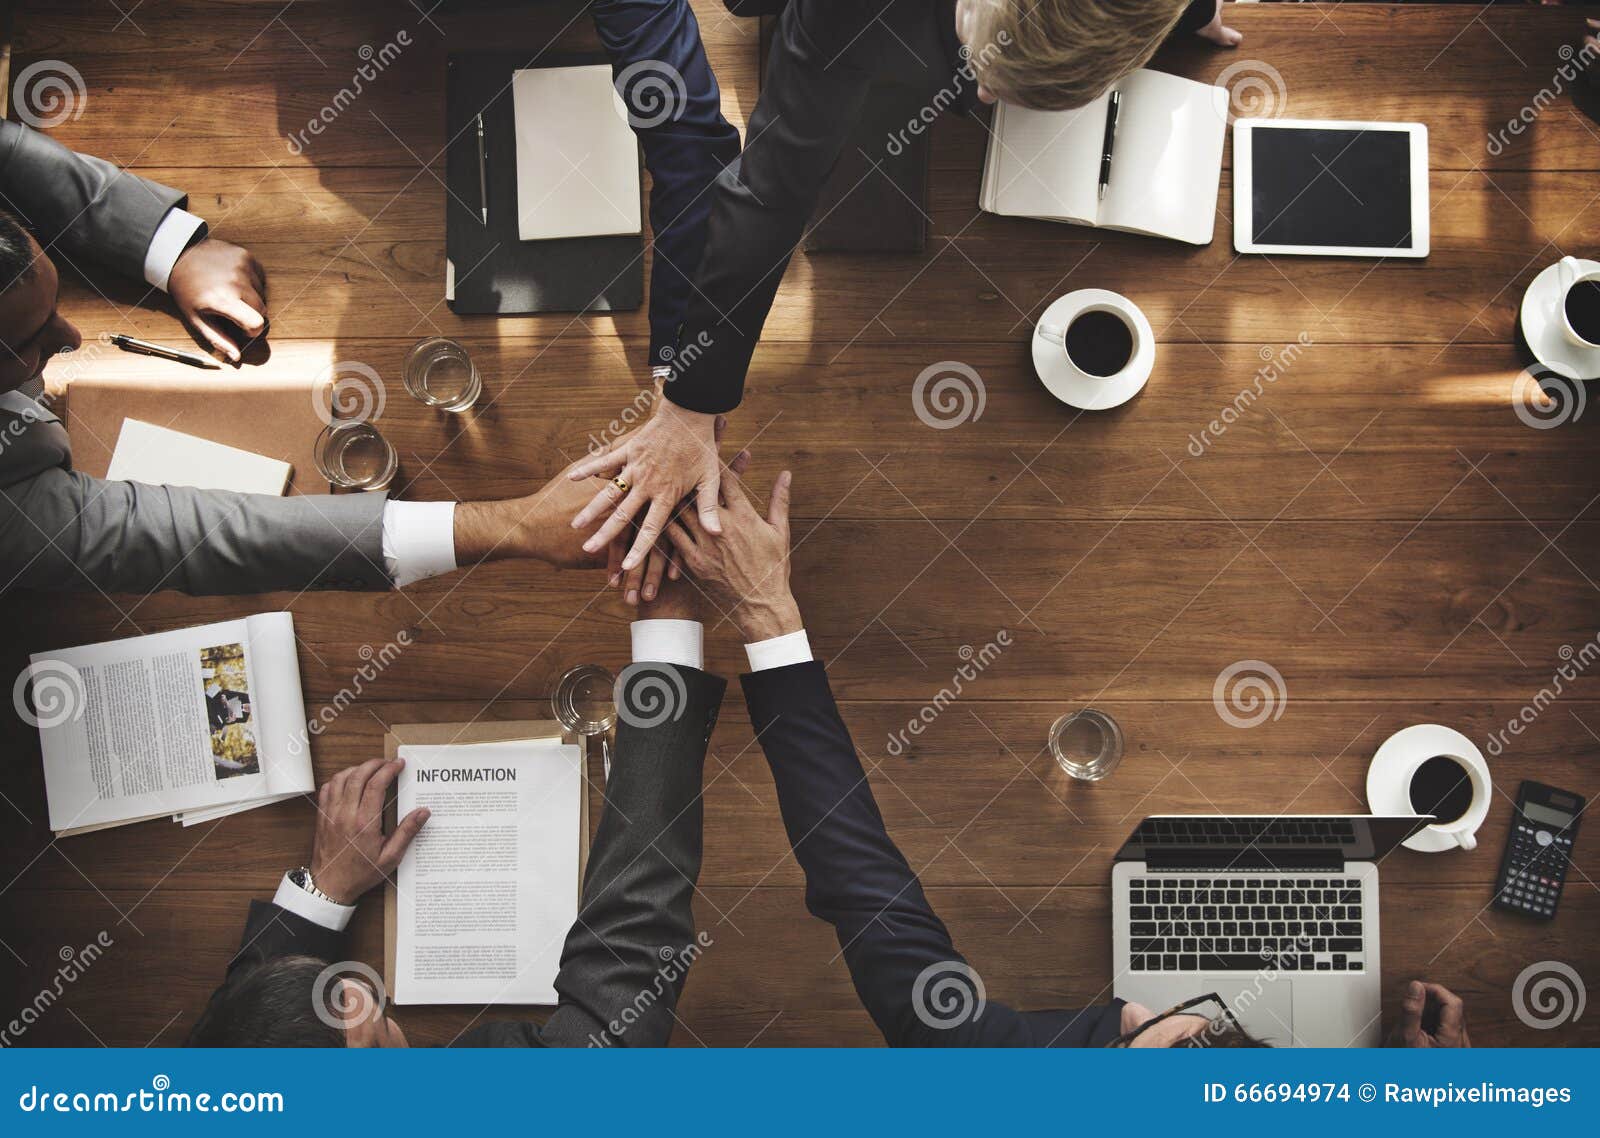 business people teamwork collaboration relation concept